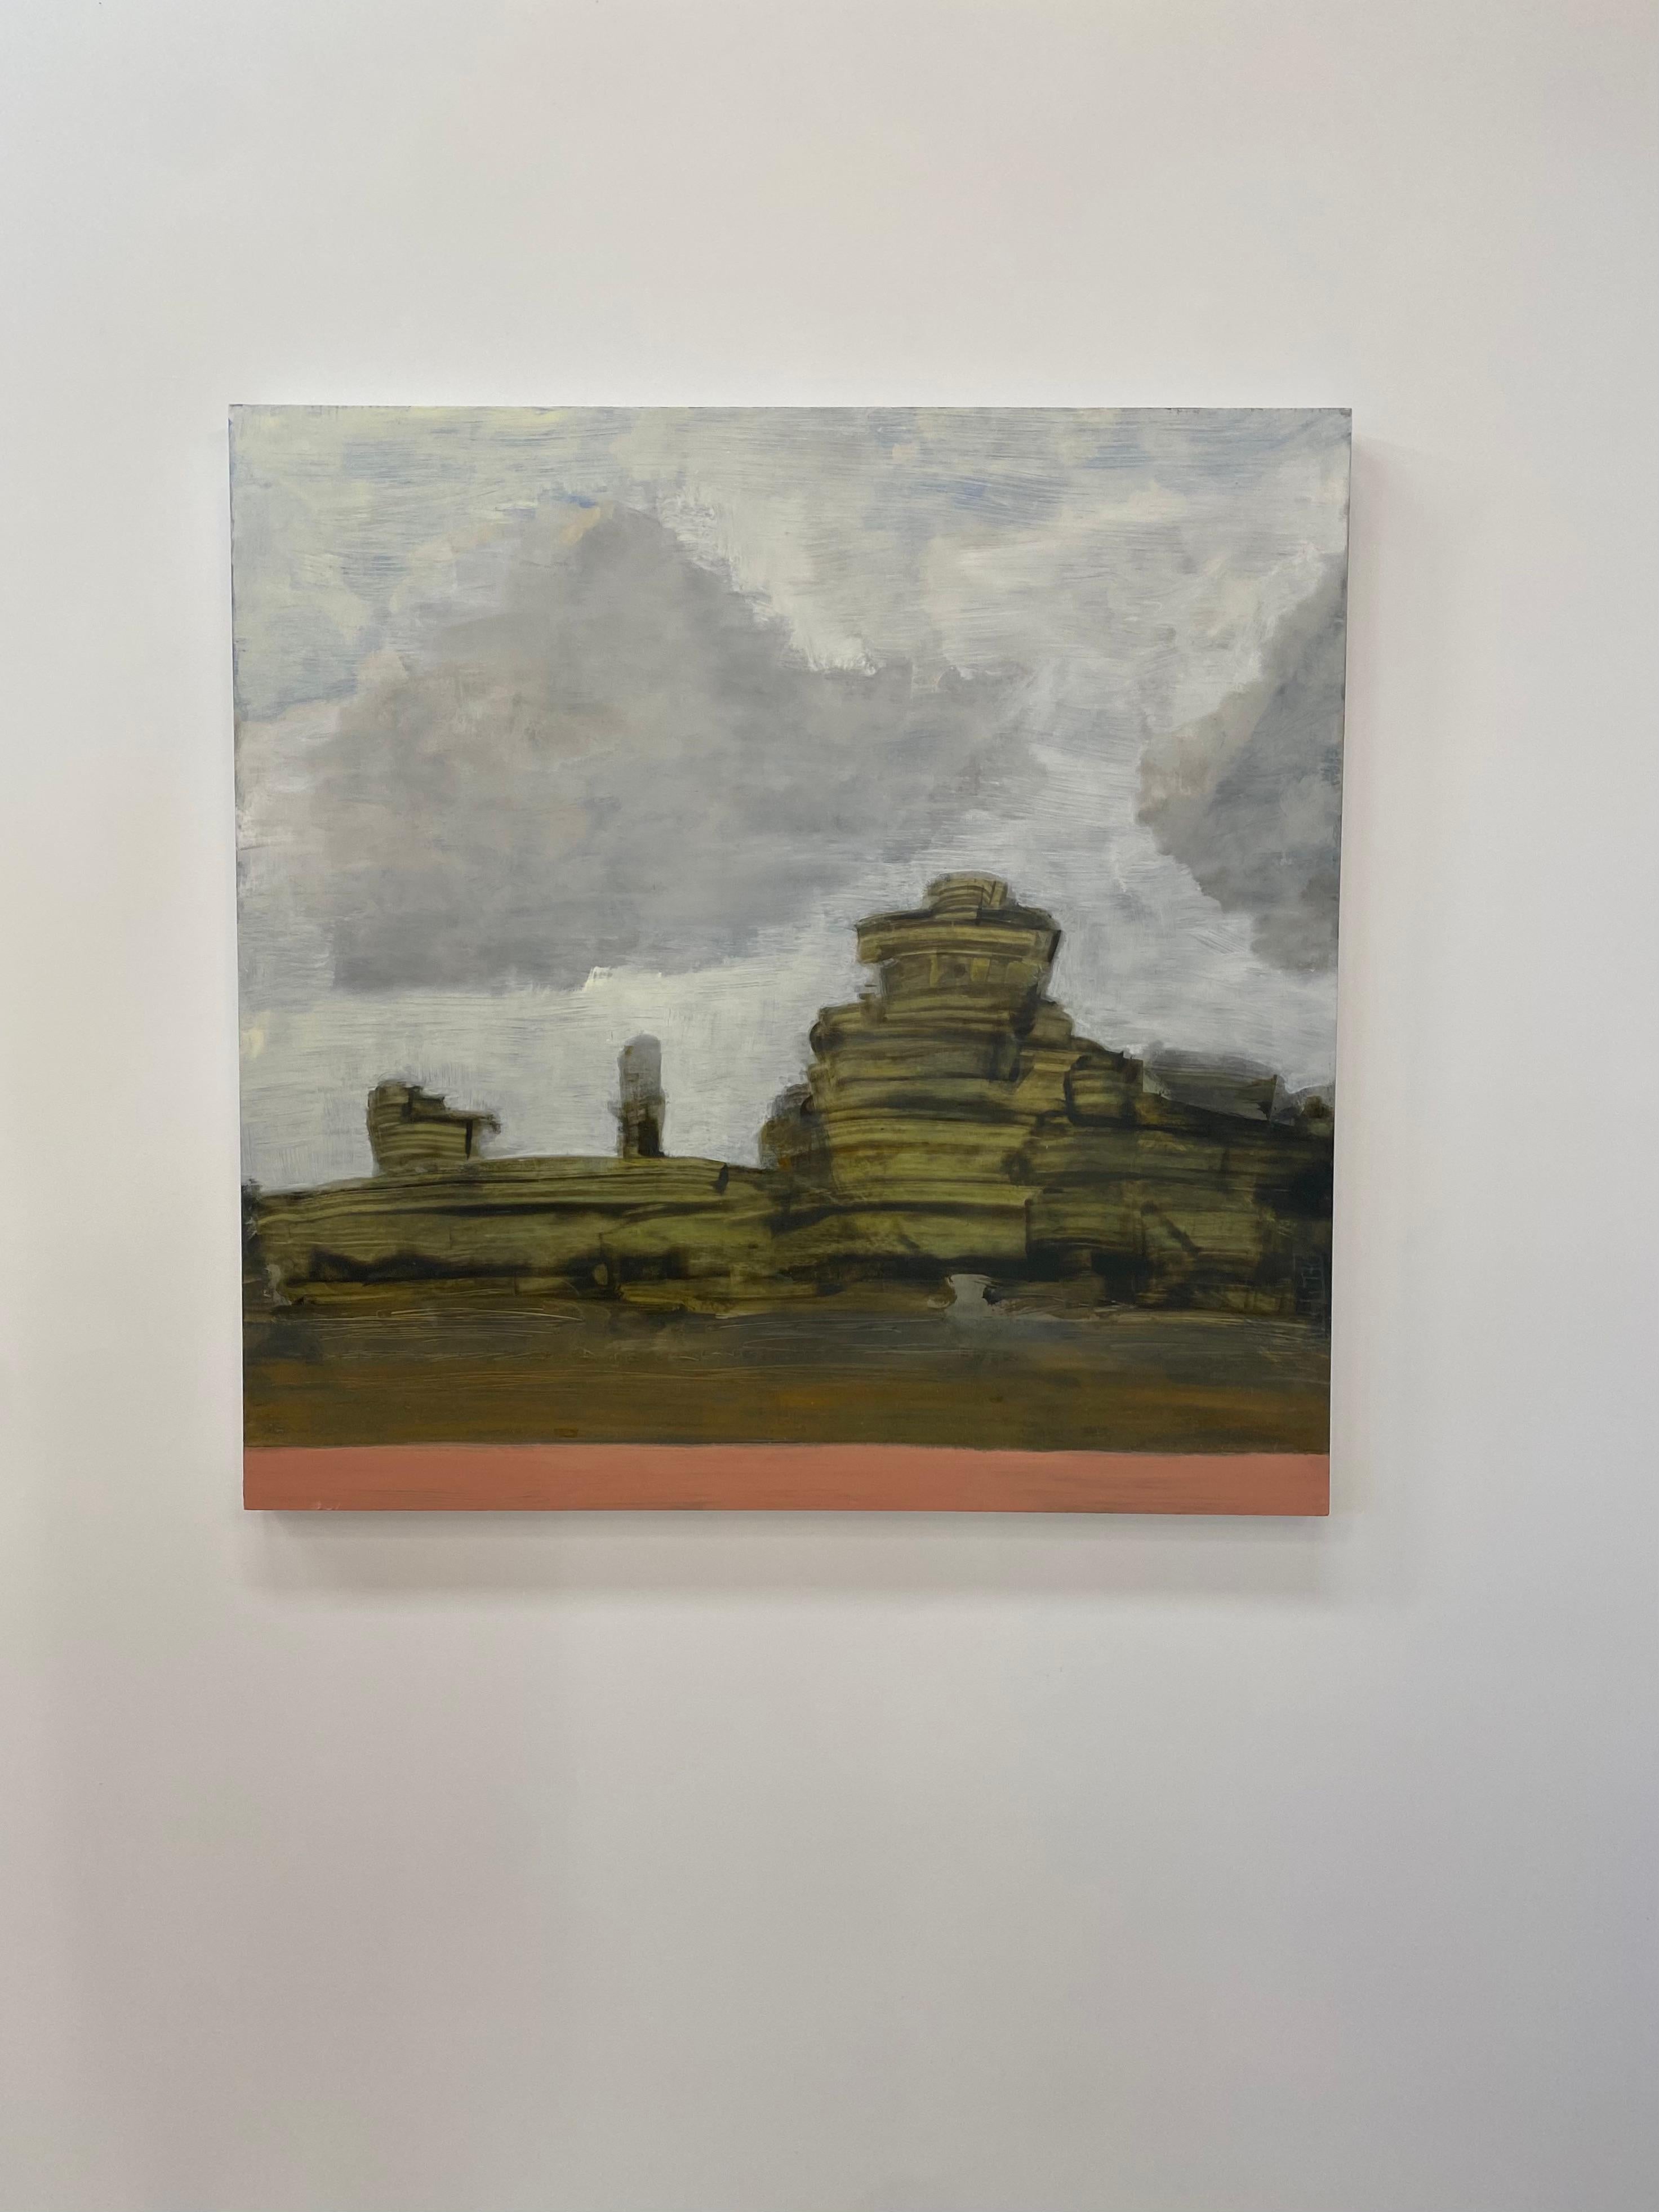 Space and Mass Out There, Desert Landscape, Rock Formations, Clouds, Sky - Painting by David Konigsberg